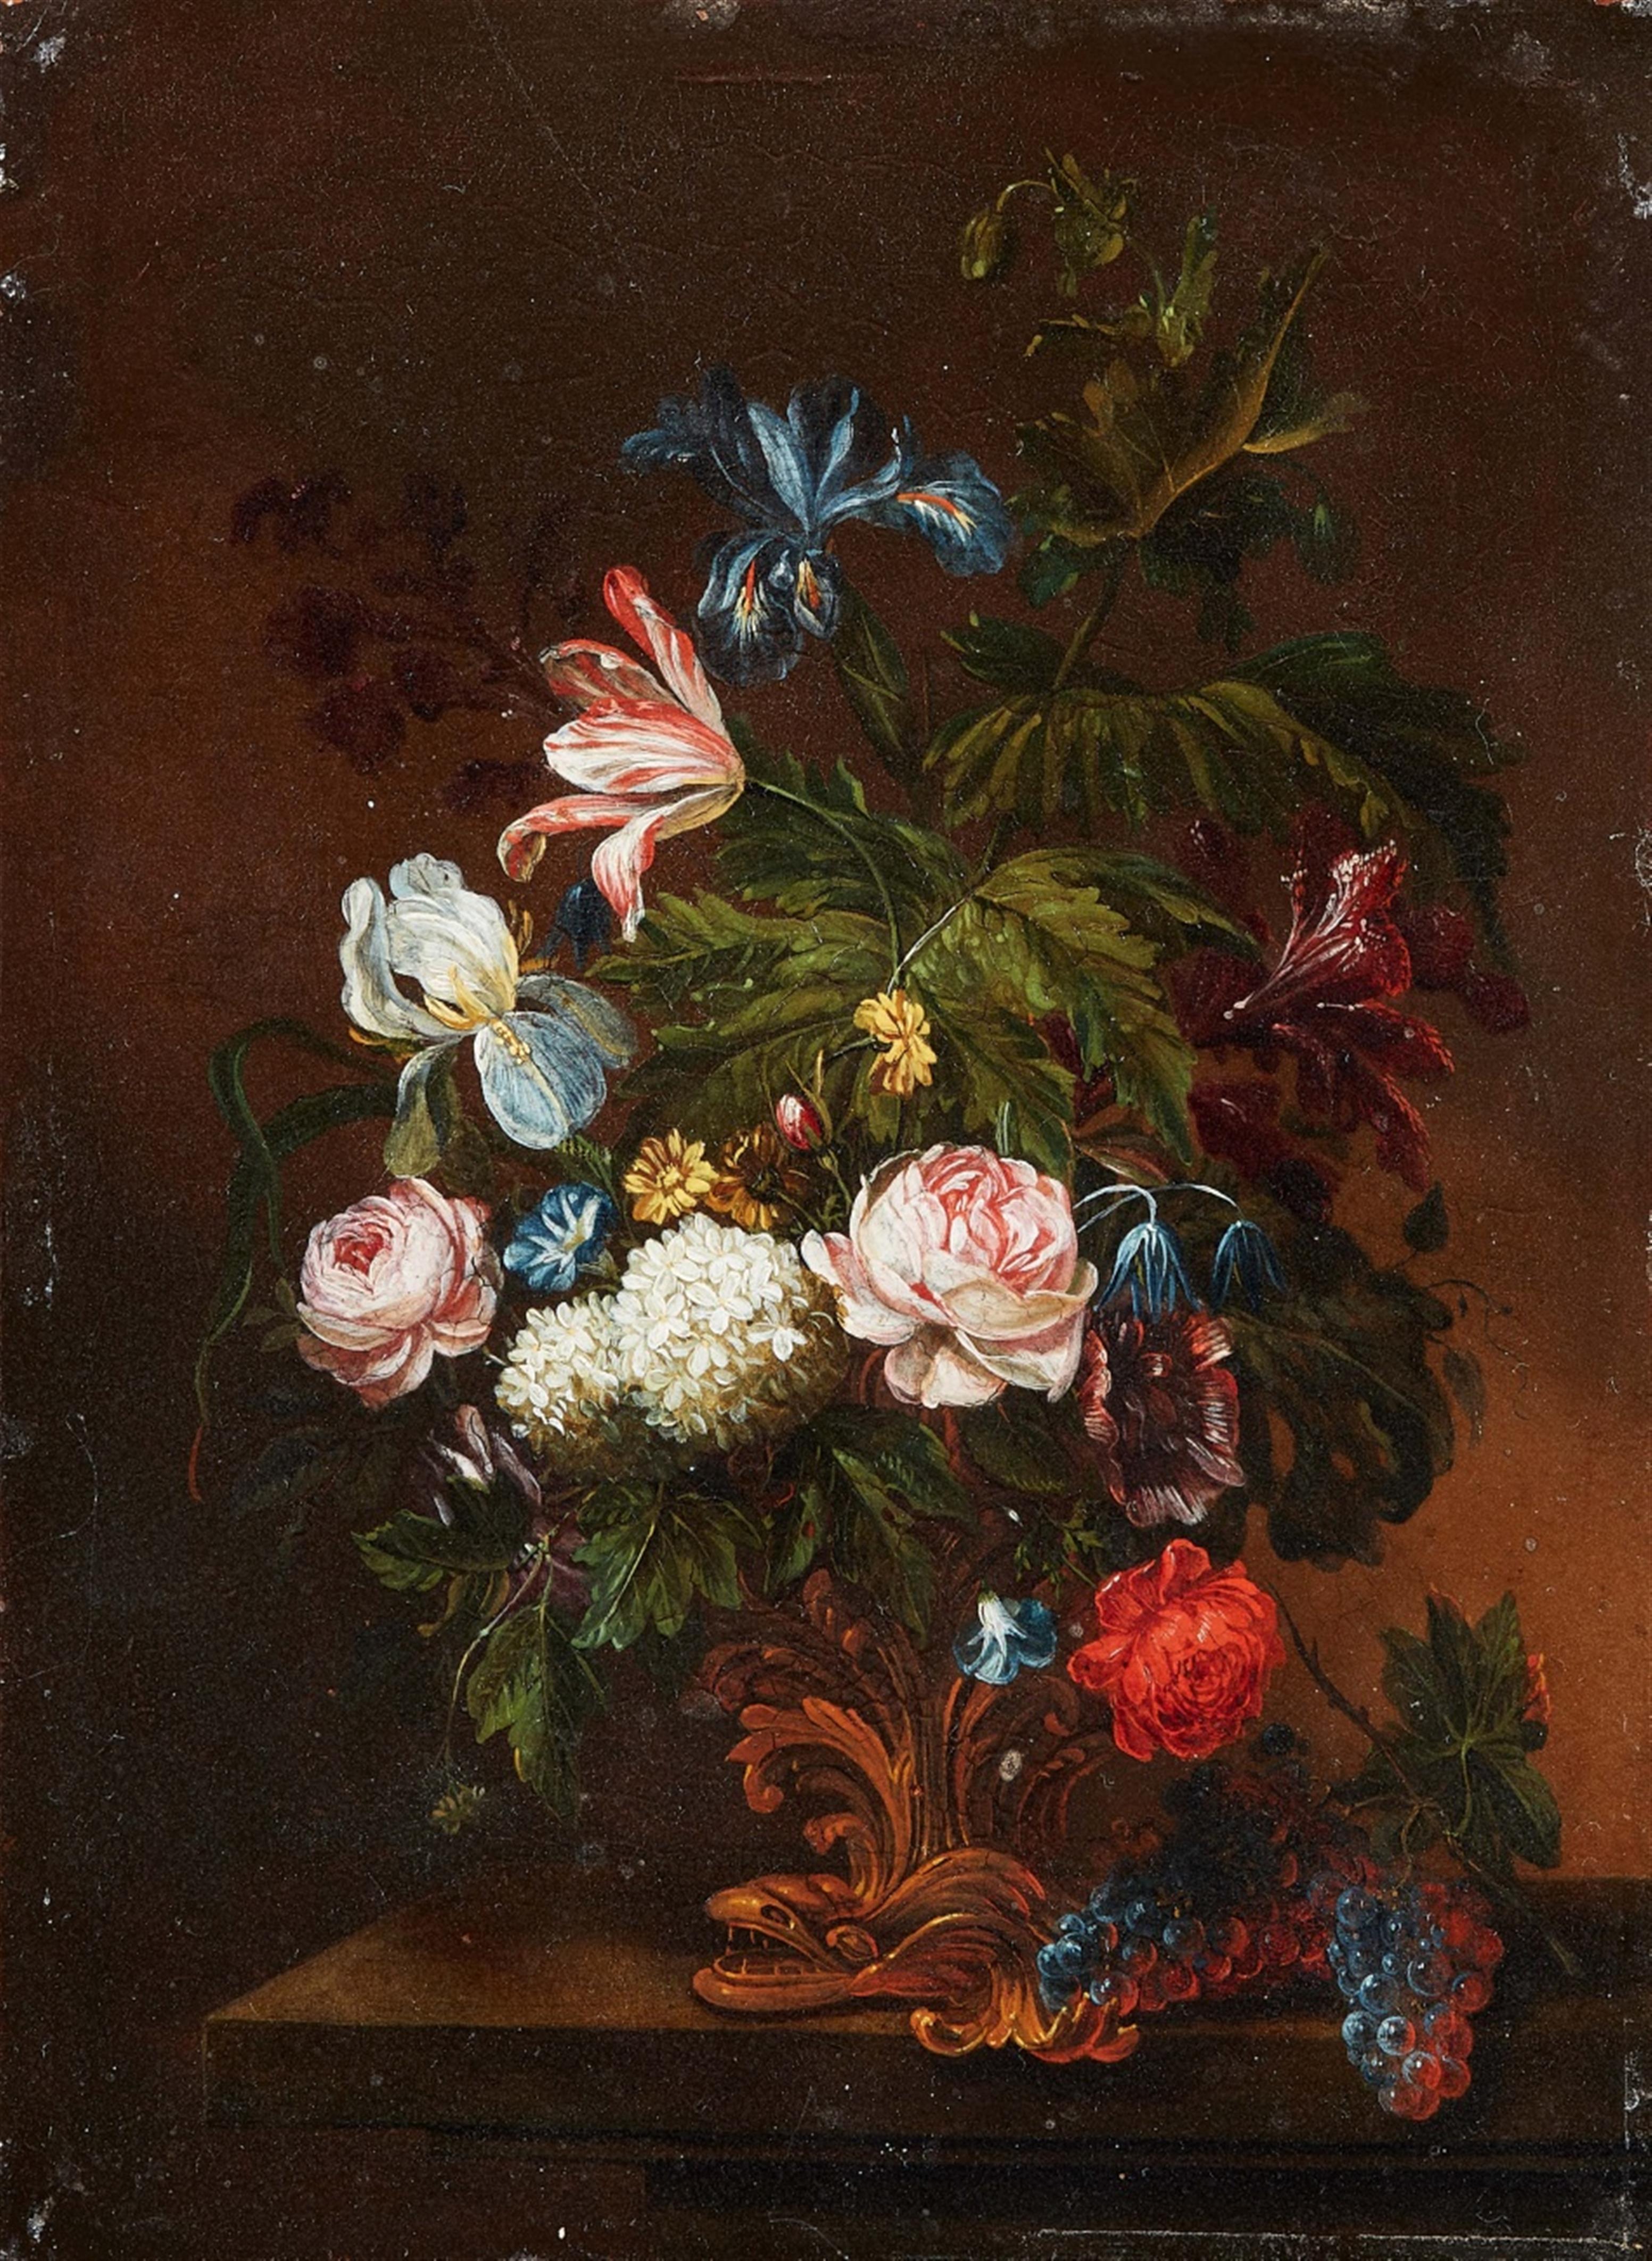 Caspar Hirscheli, attributed to - Small Still Life with Roses, Snowball Flowers, Morning Glory, Iris, and Tulips - image-1